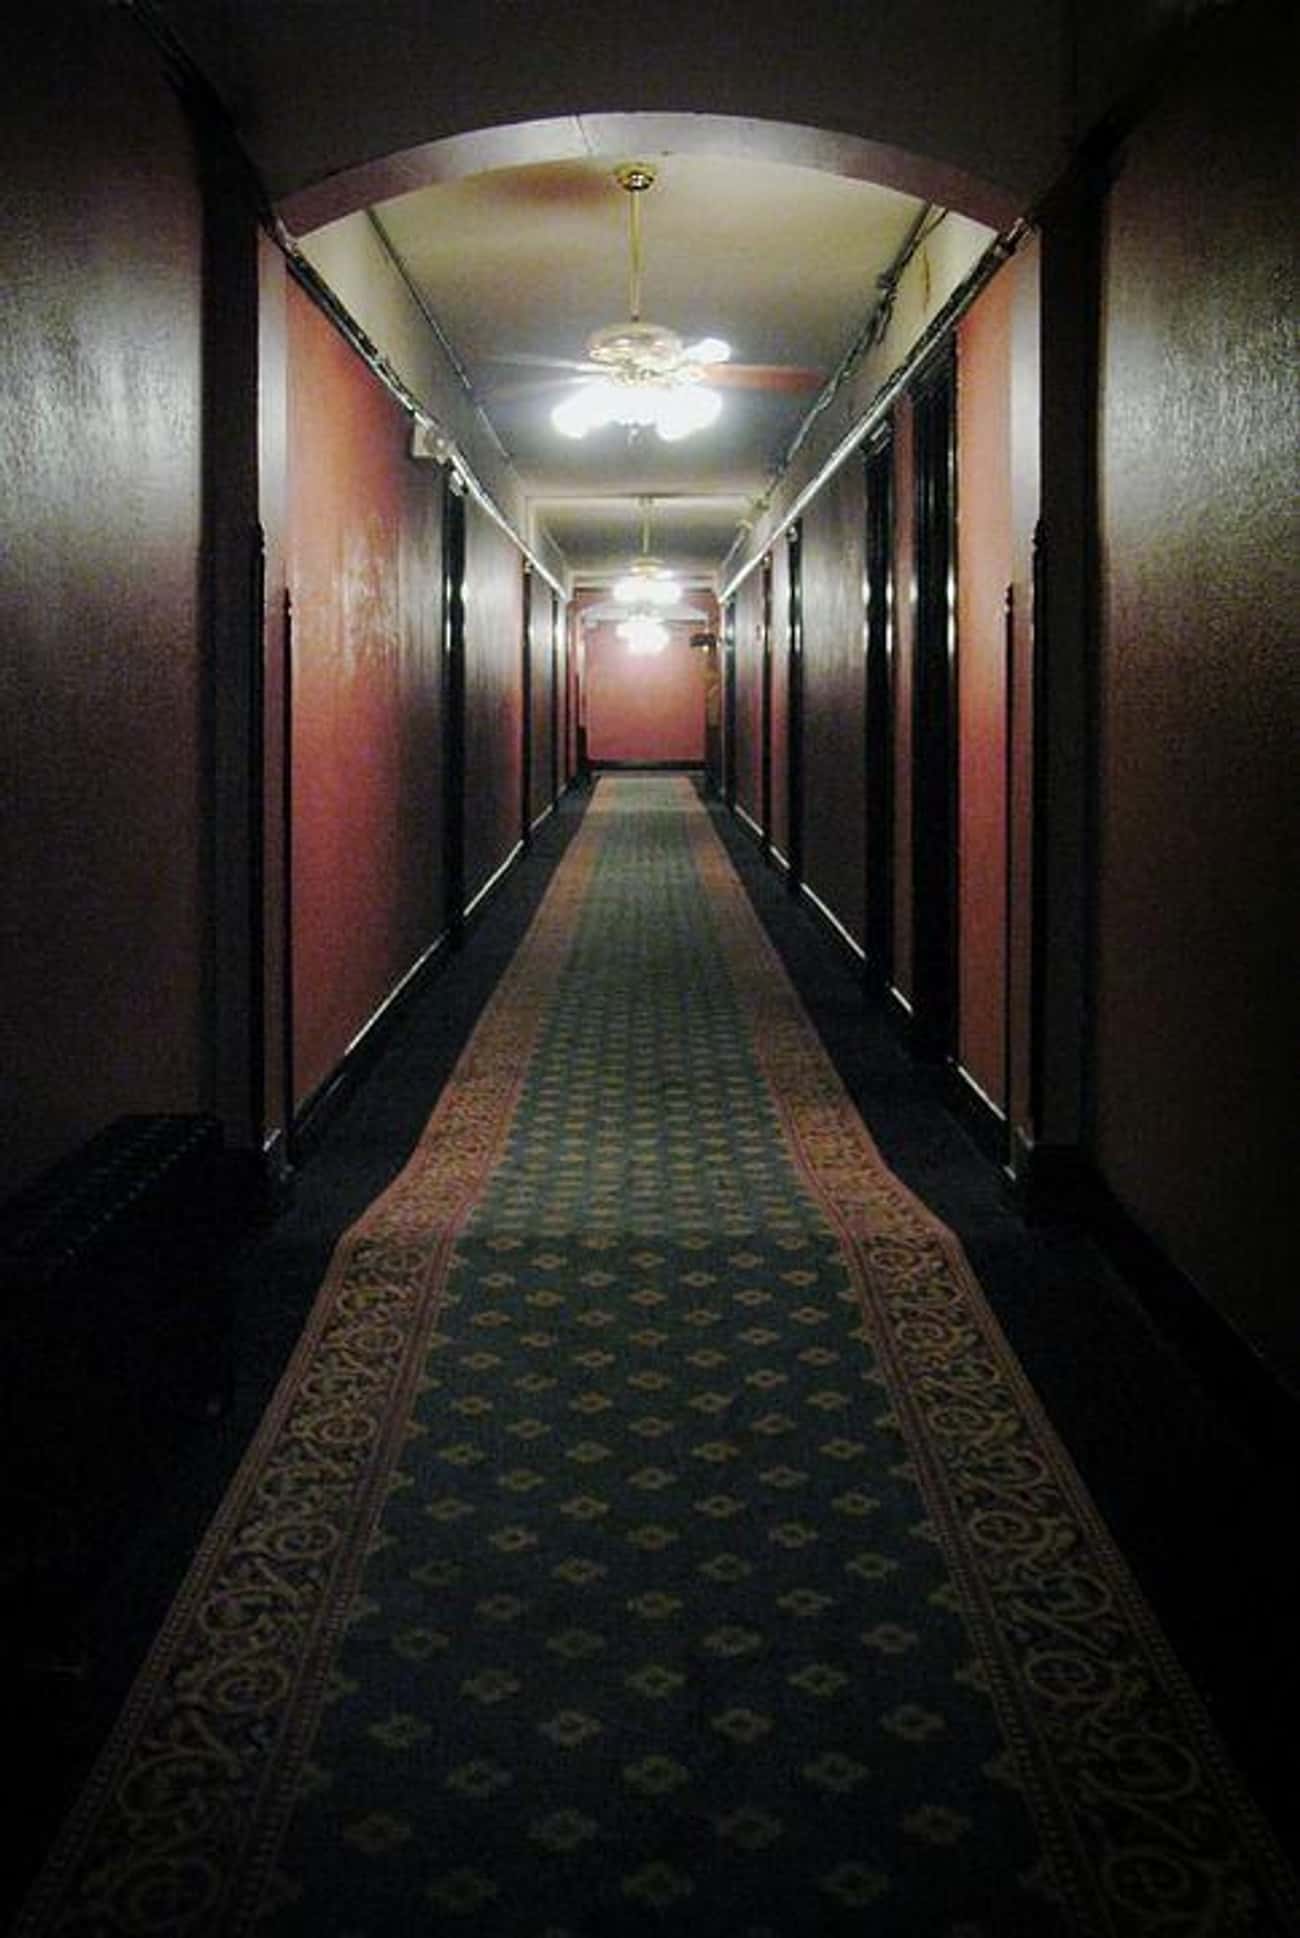 Ghosts Stay With The Guests At The Lowe Hotel